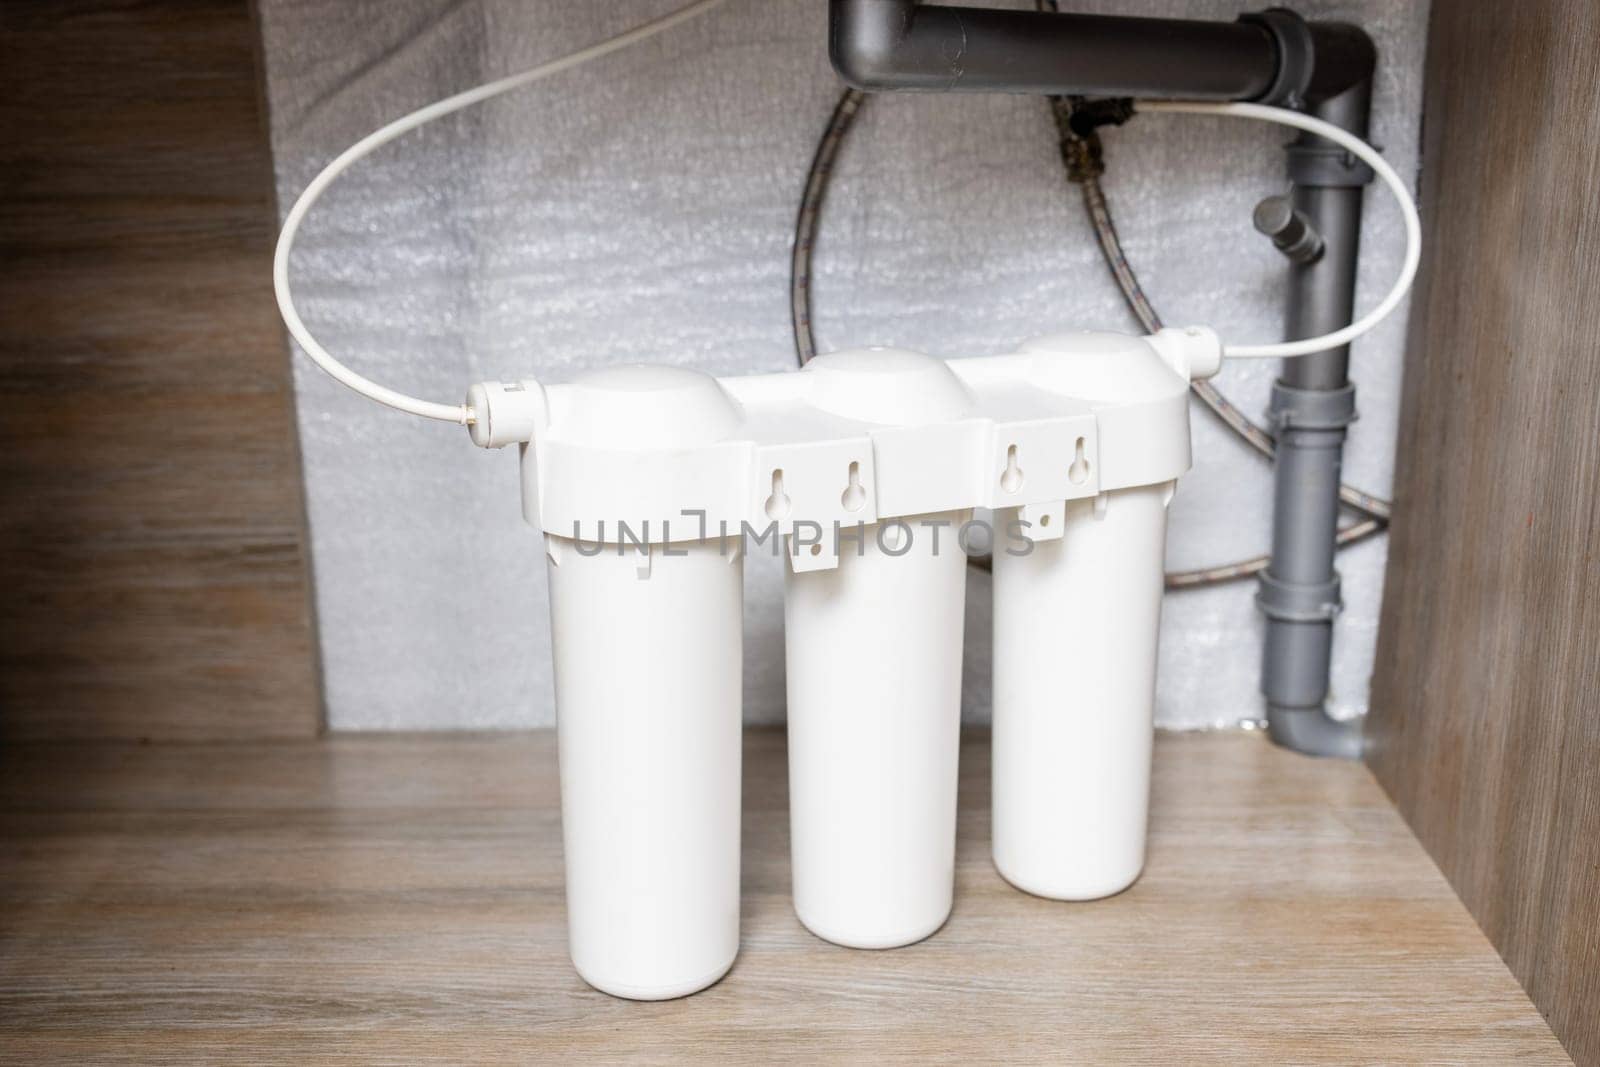 Installation of water purification filters under kitchen sink in cupboard by andreyz